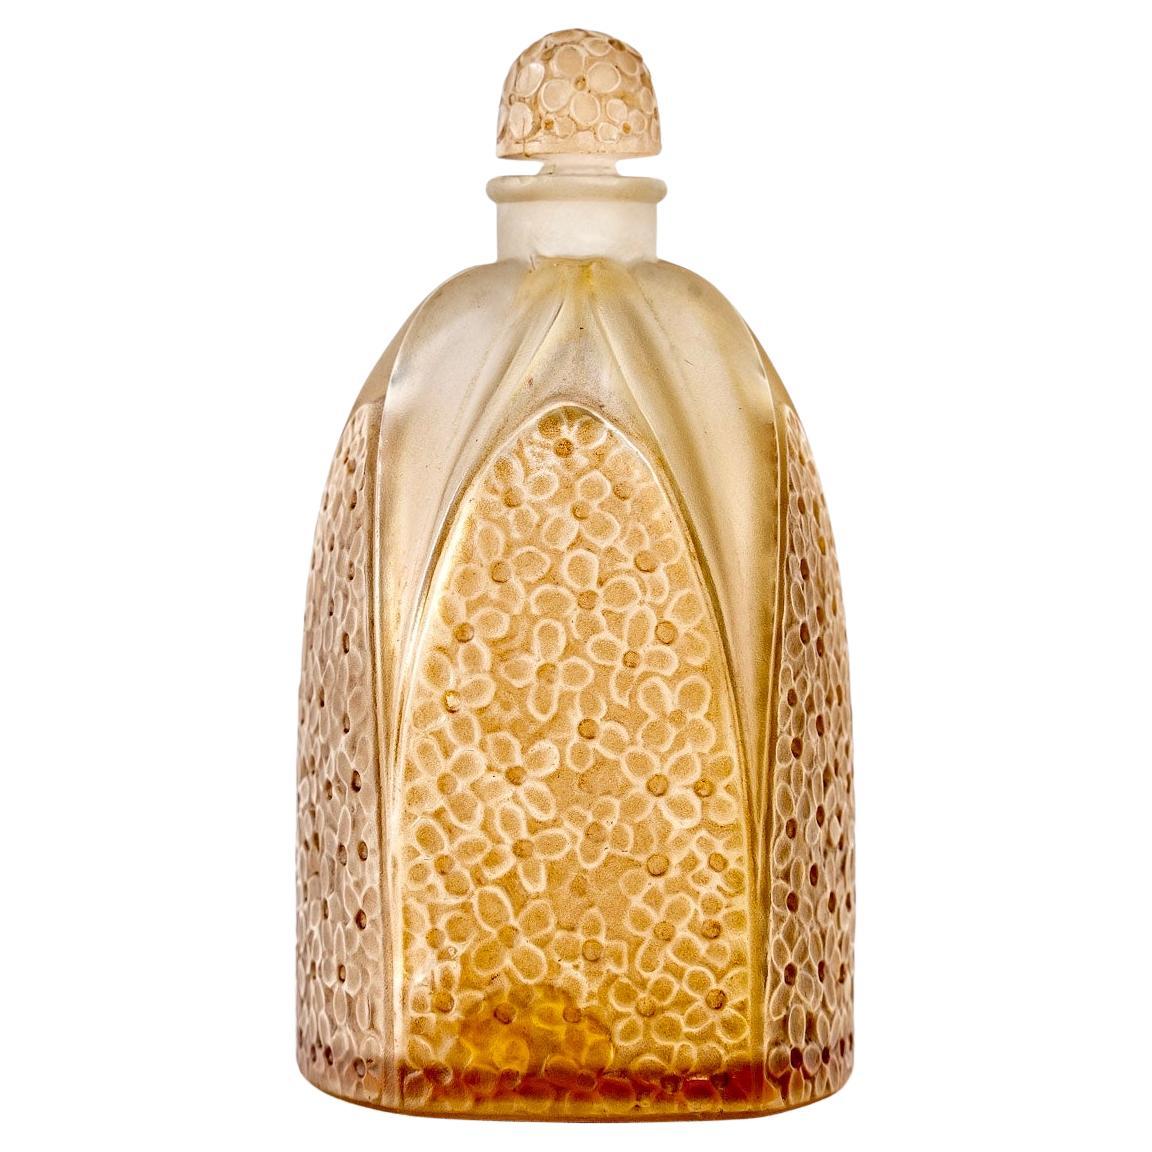 1925 René Lalique Perfume Bottle Le Lilas Frosted Glass Sepia Patina For Sale